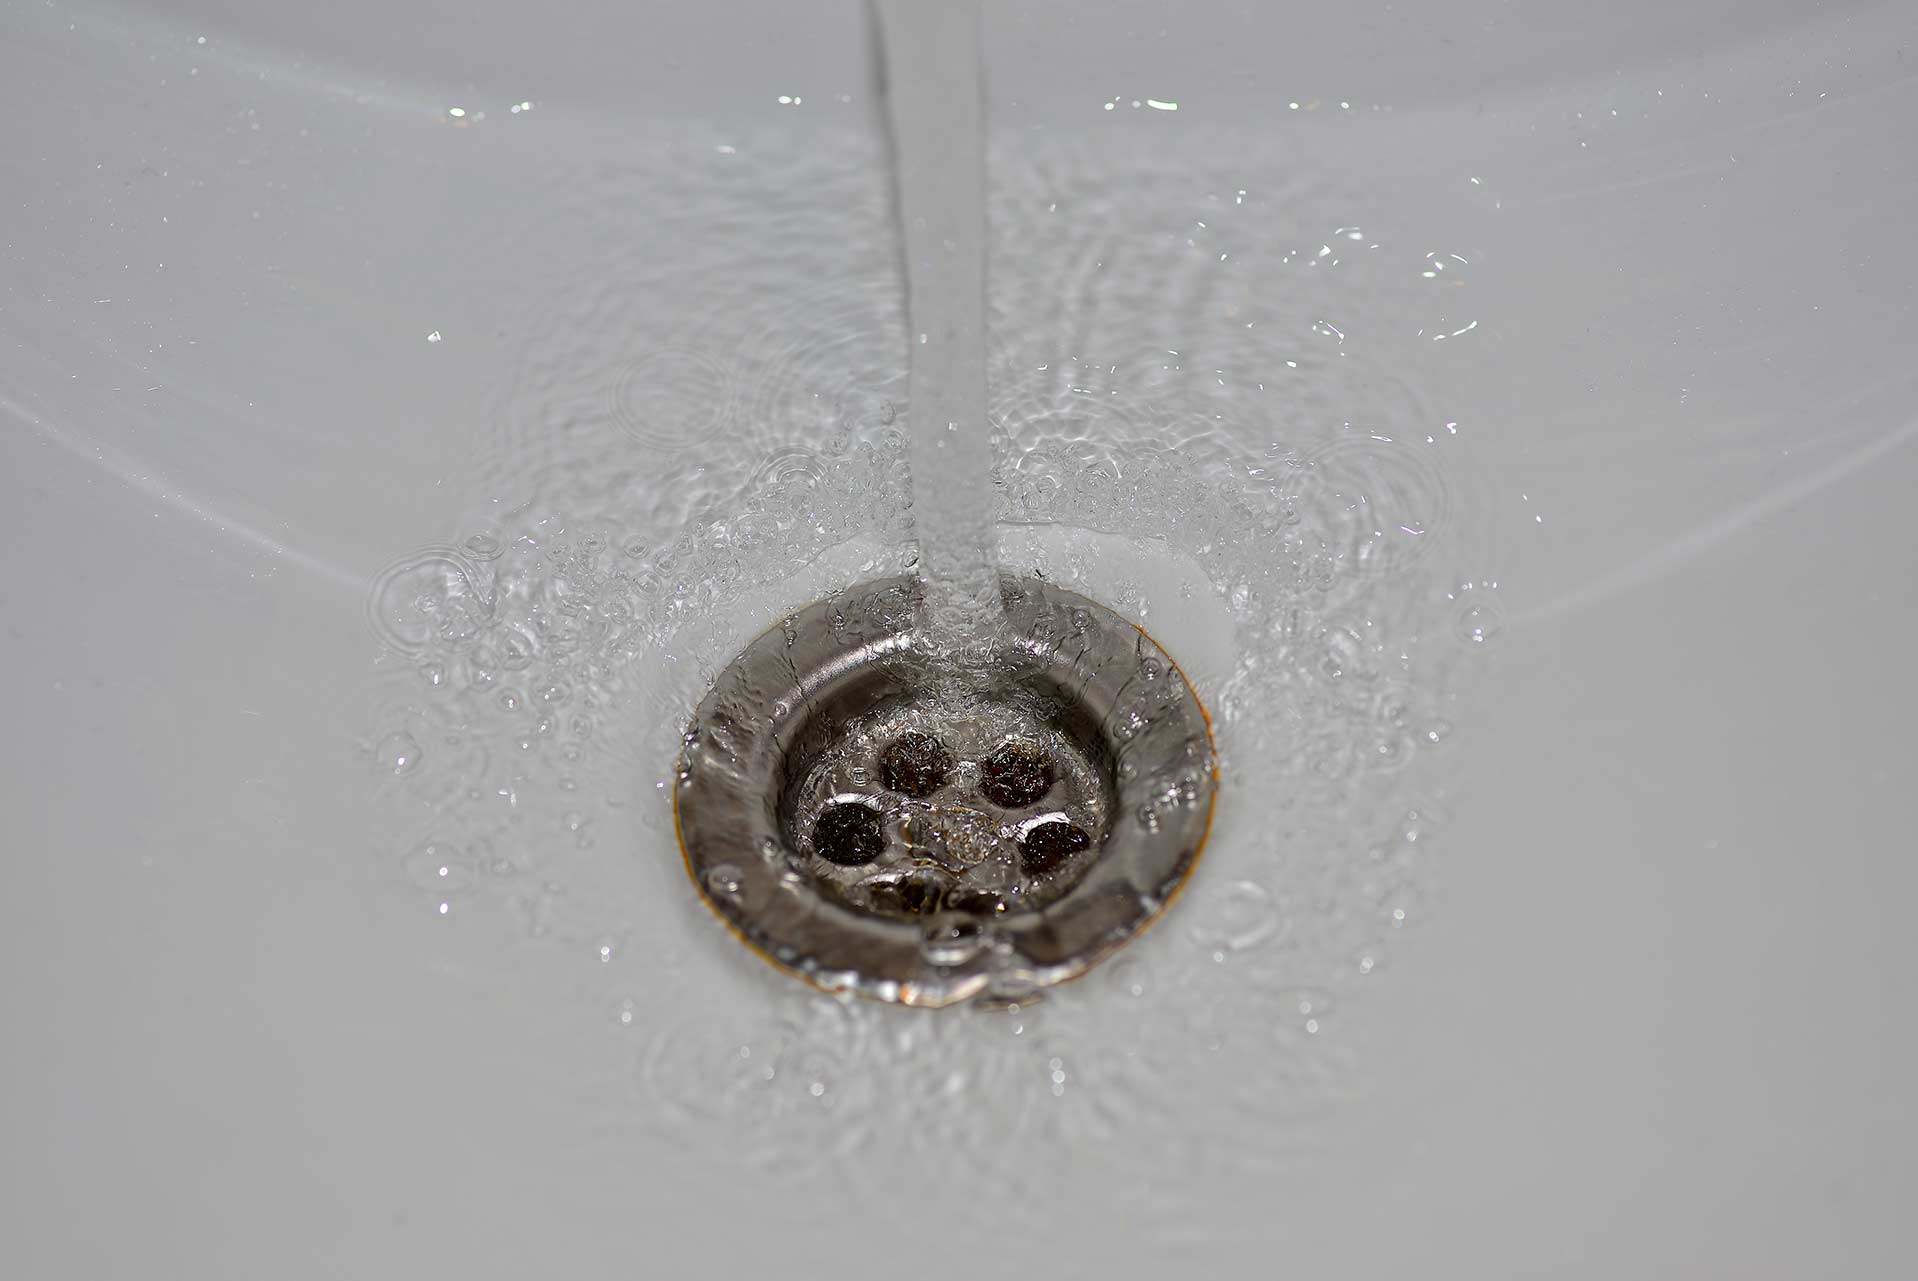 A2B Drains provides services to unblock blocked sinks and drains for properties in Swinton South Yorkshire.